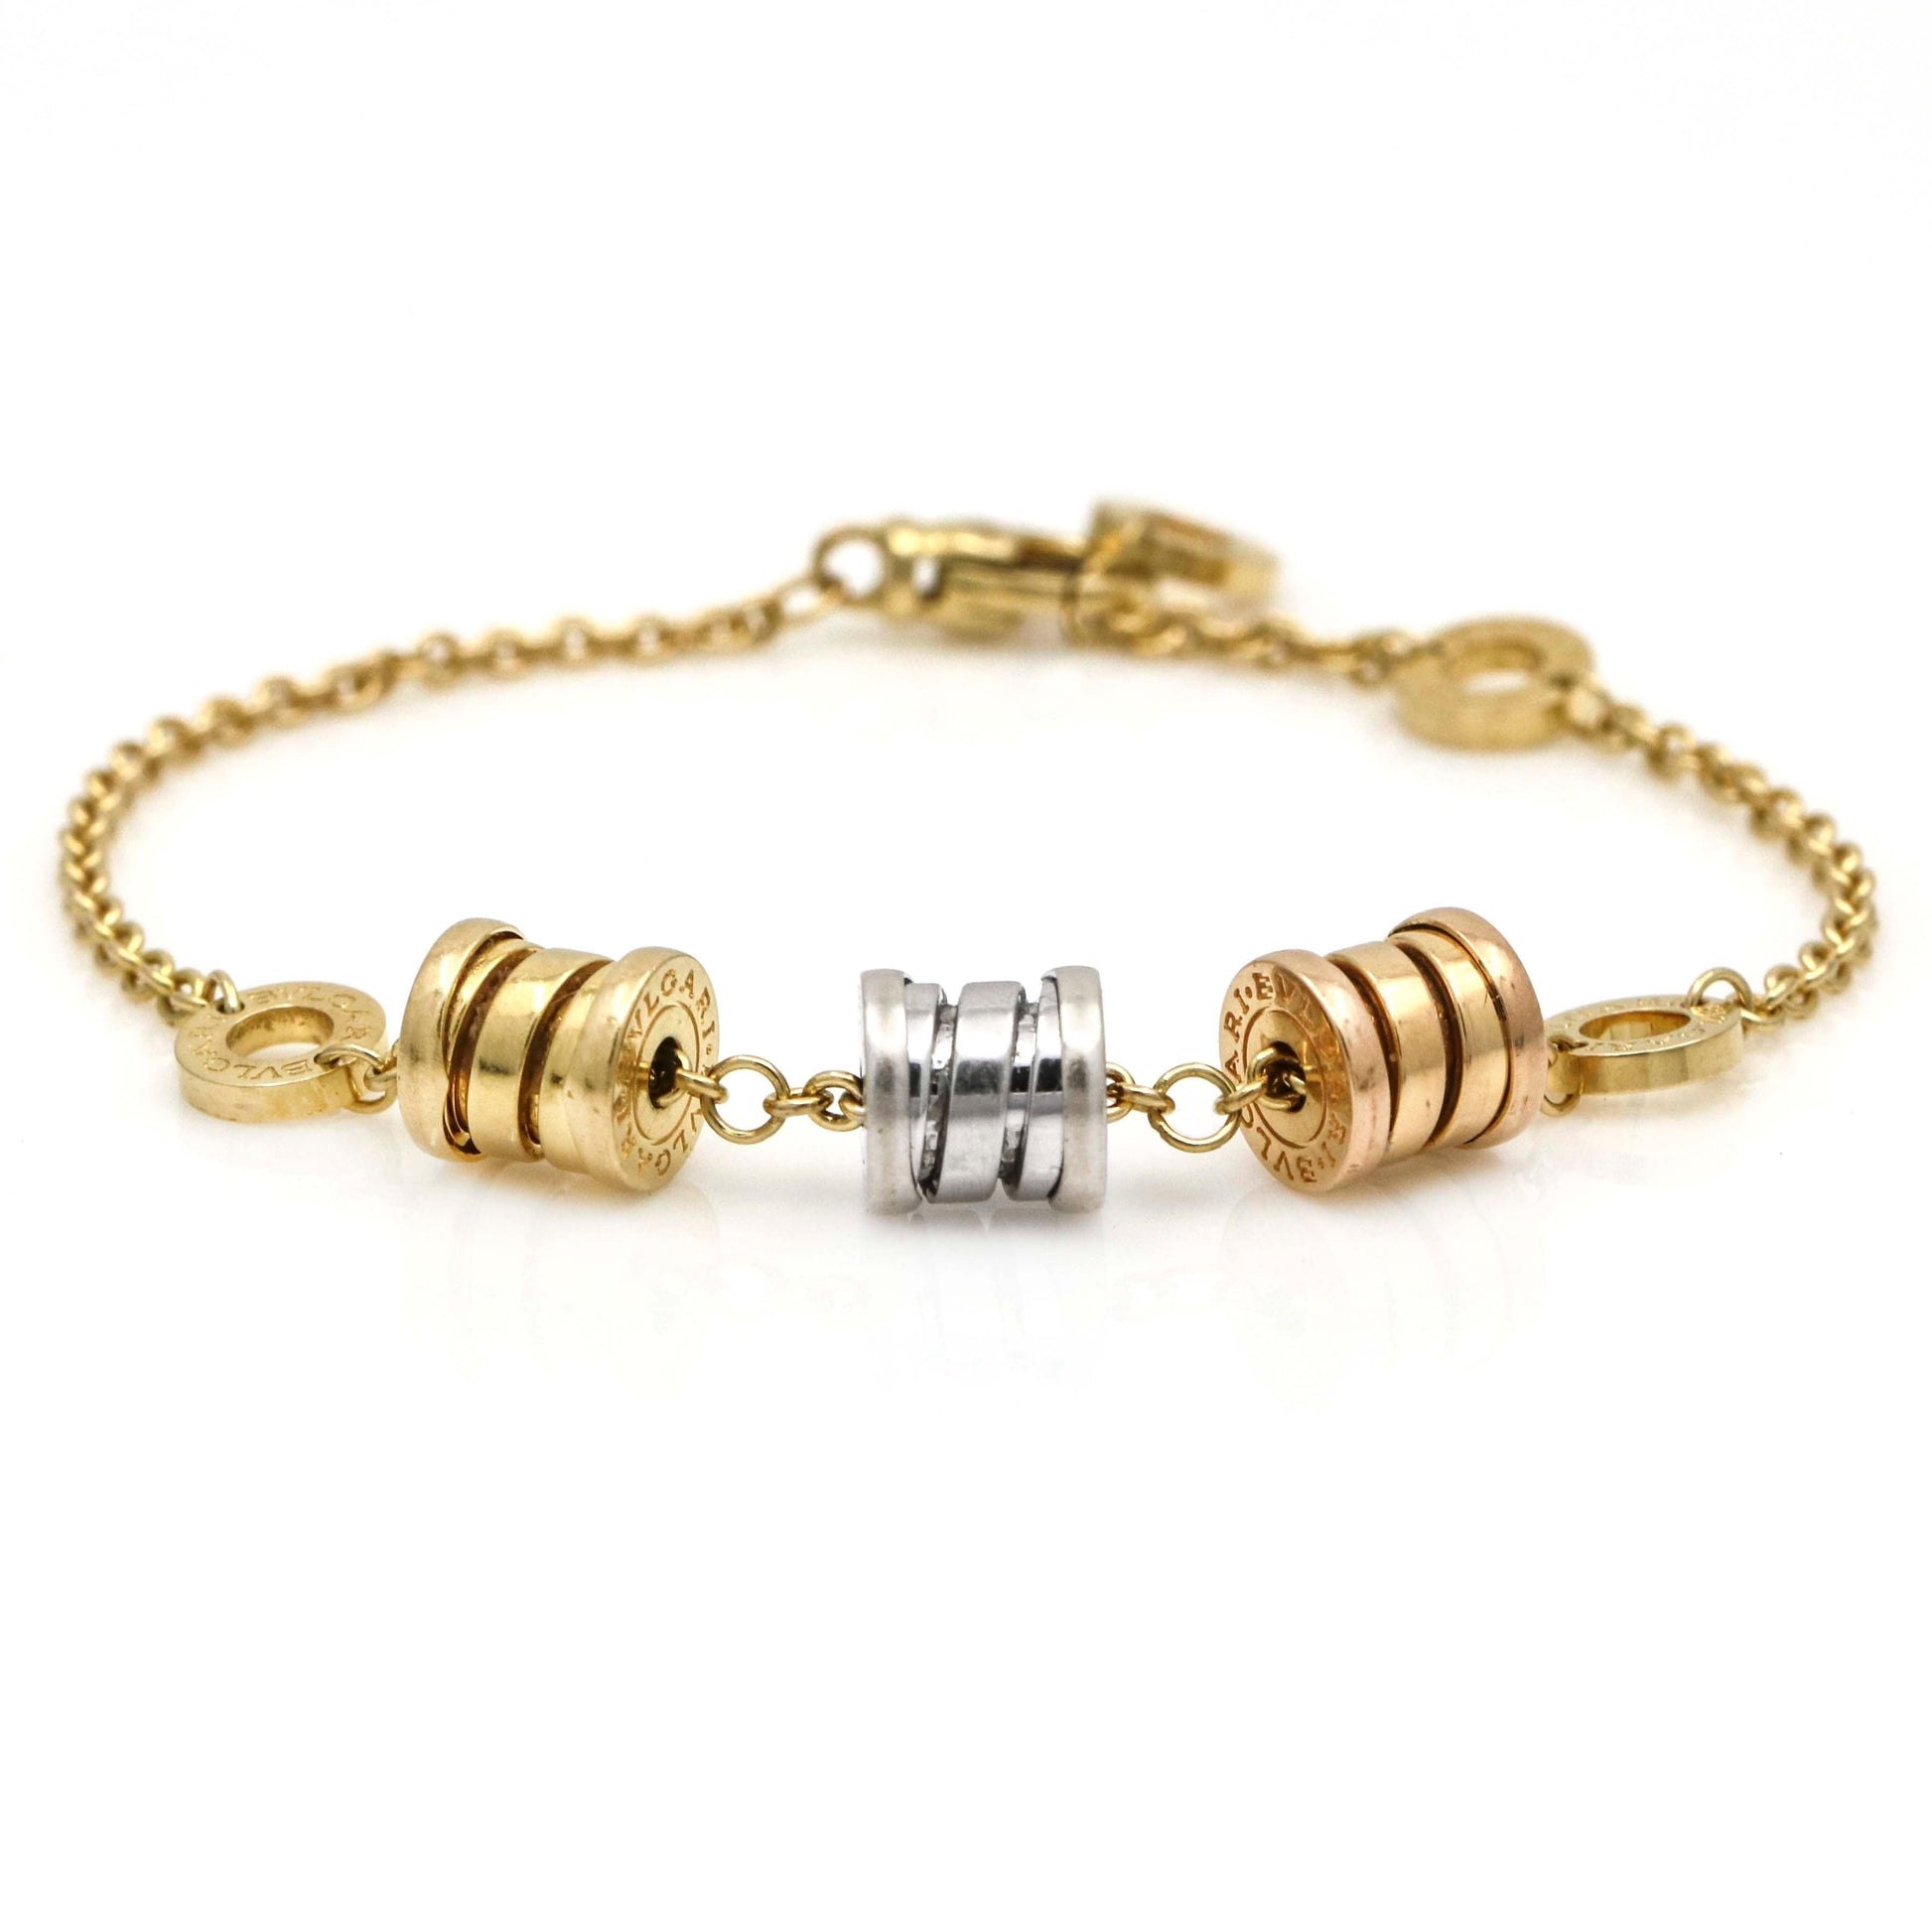 Bvlgari Women's B.Zero1 Bracelet in 18k Gold with Tricolor Charms Small - 31 Jewels Inc.